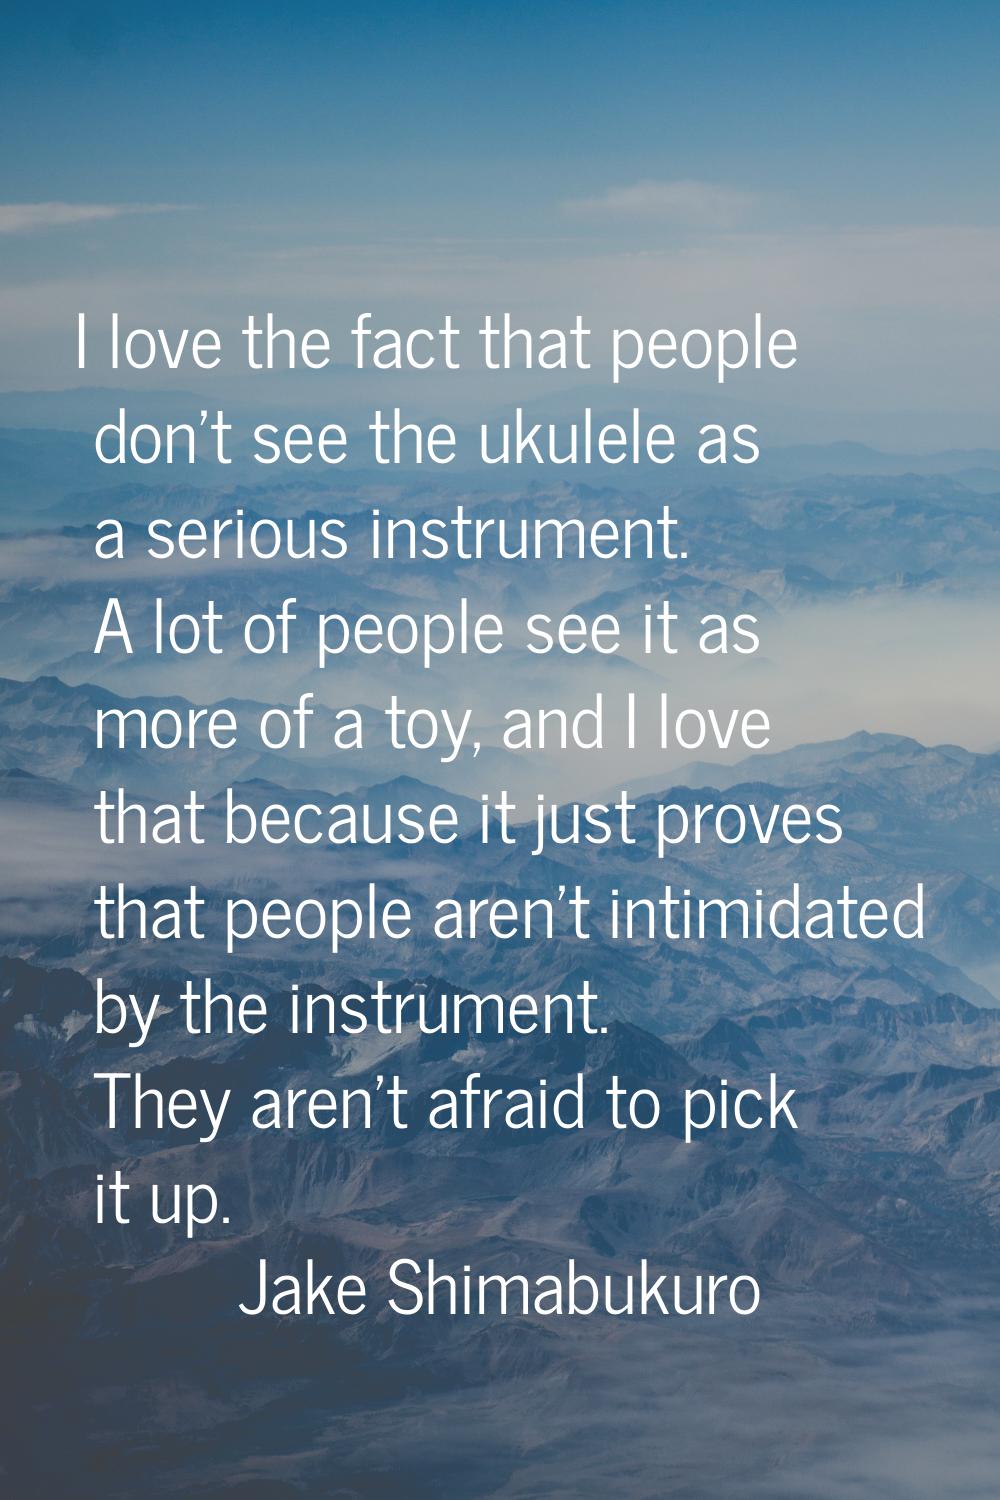 I love the fact that people don't see the ukulele as a serious instrument. A lot of people see it a